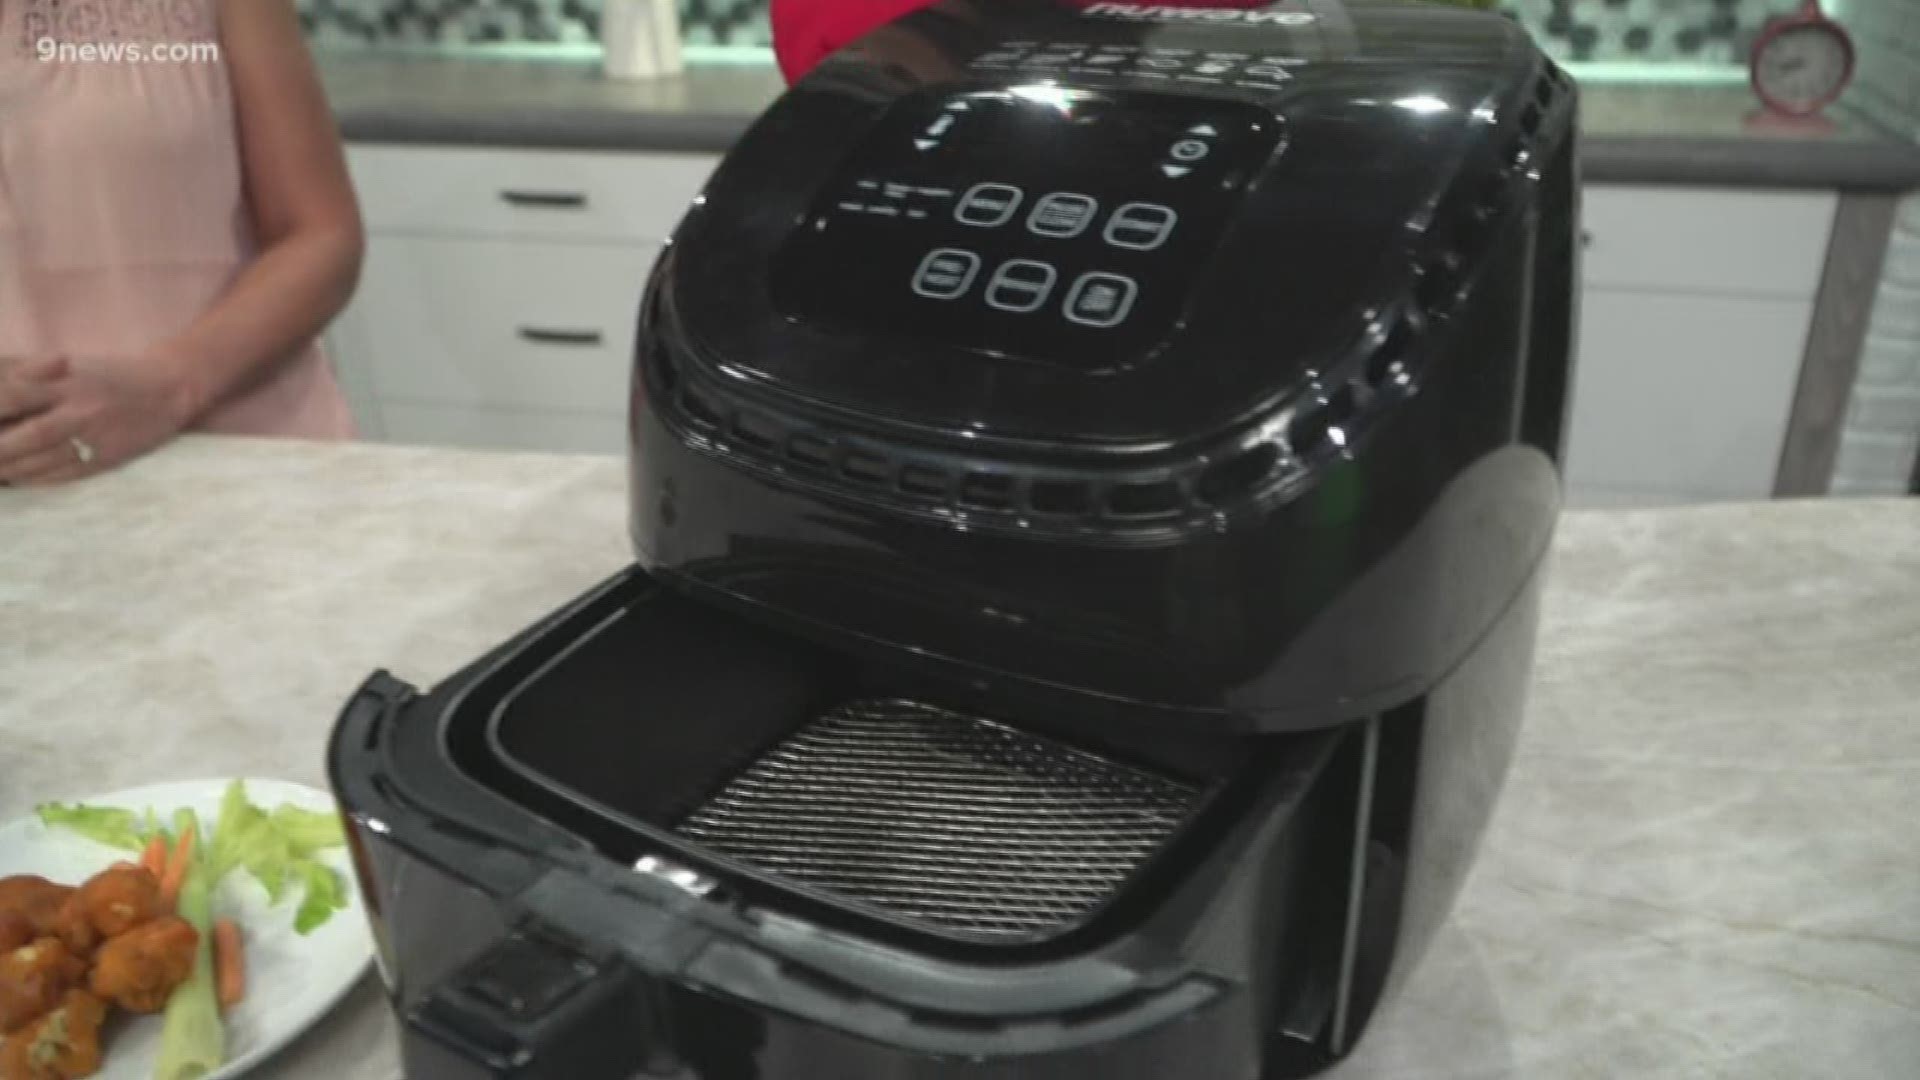 Every few years the food industry introduces a new kitchen gadget that people go crazy over. Right now, that gadget is the air fryer.